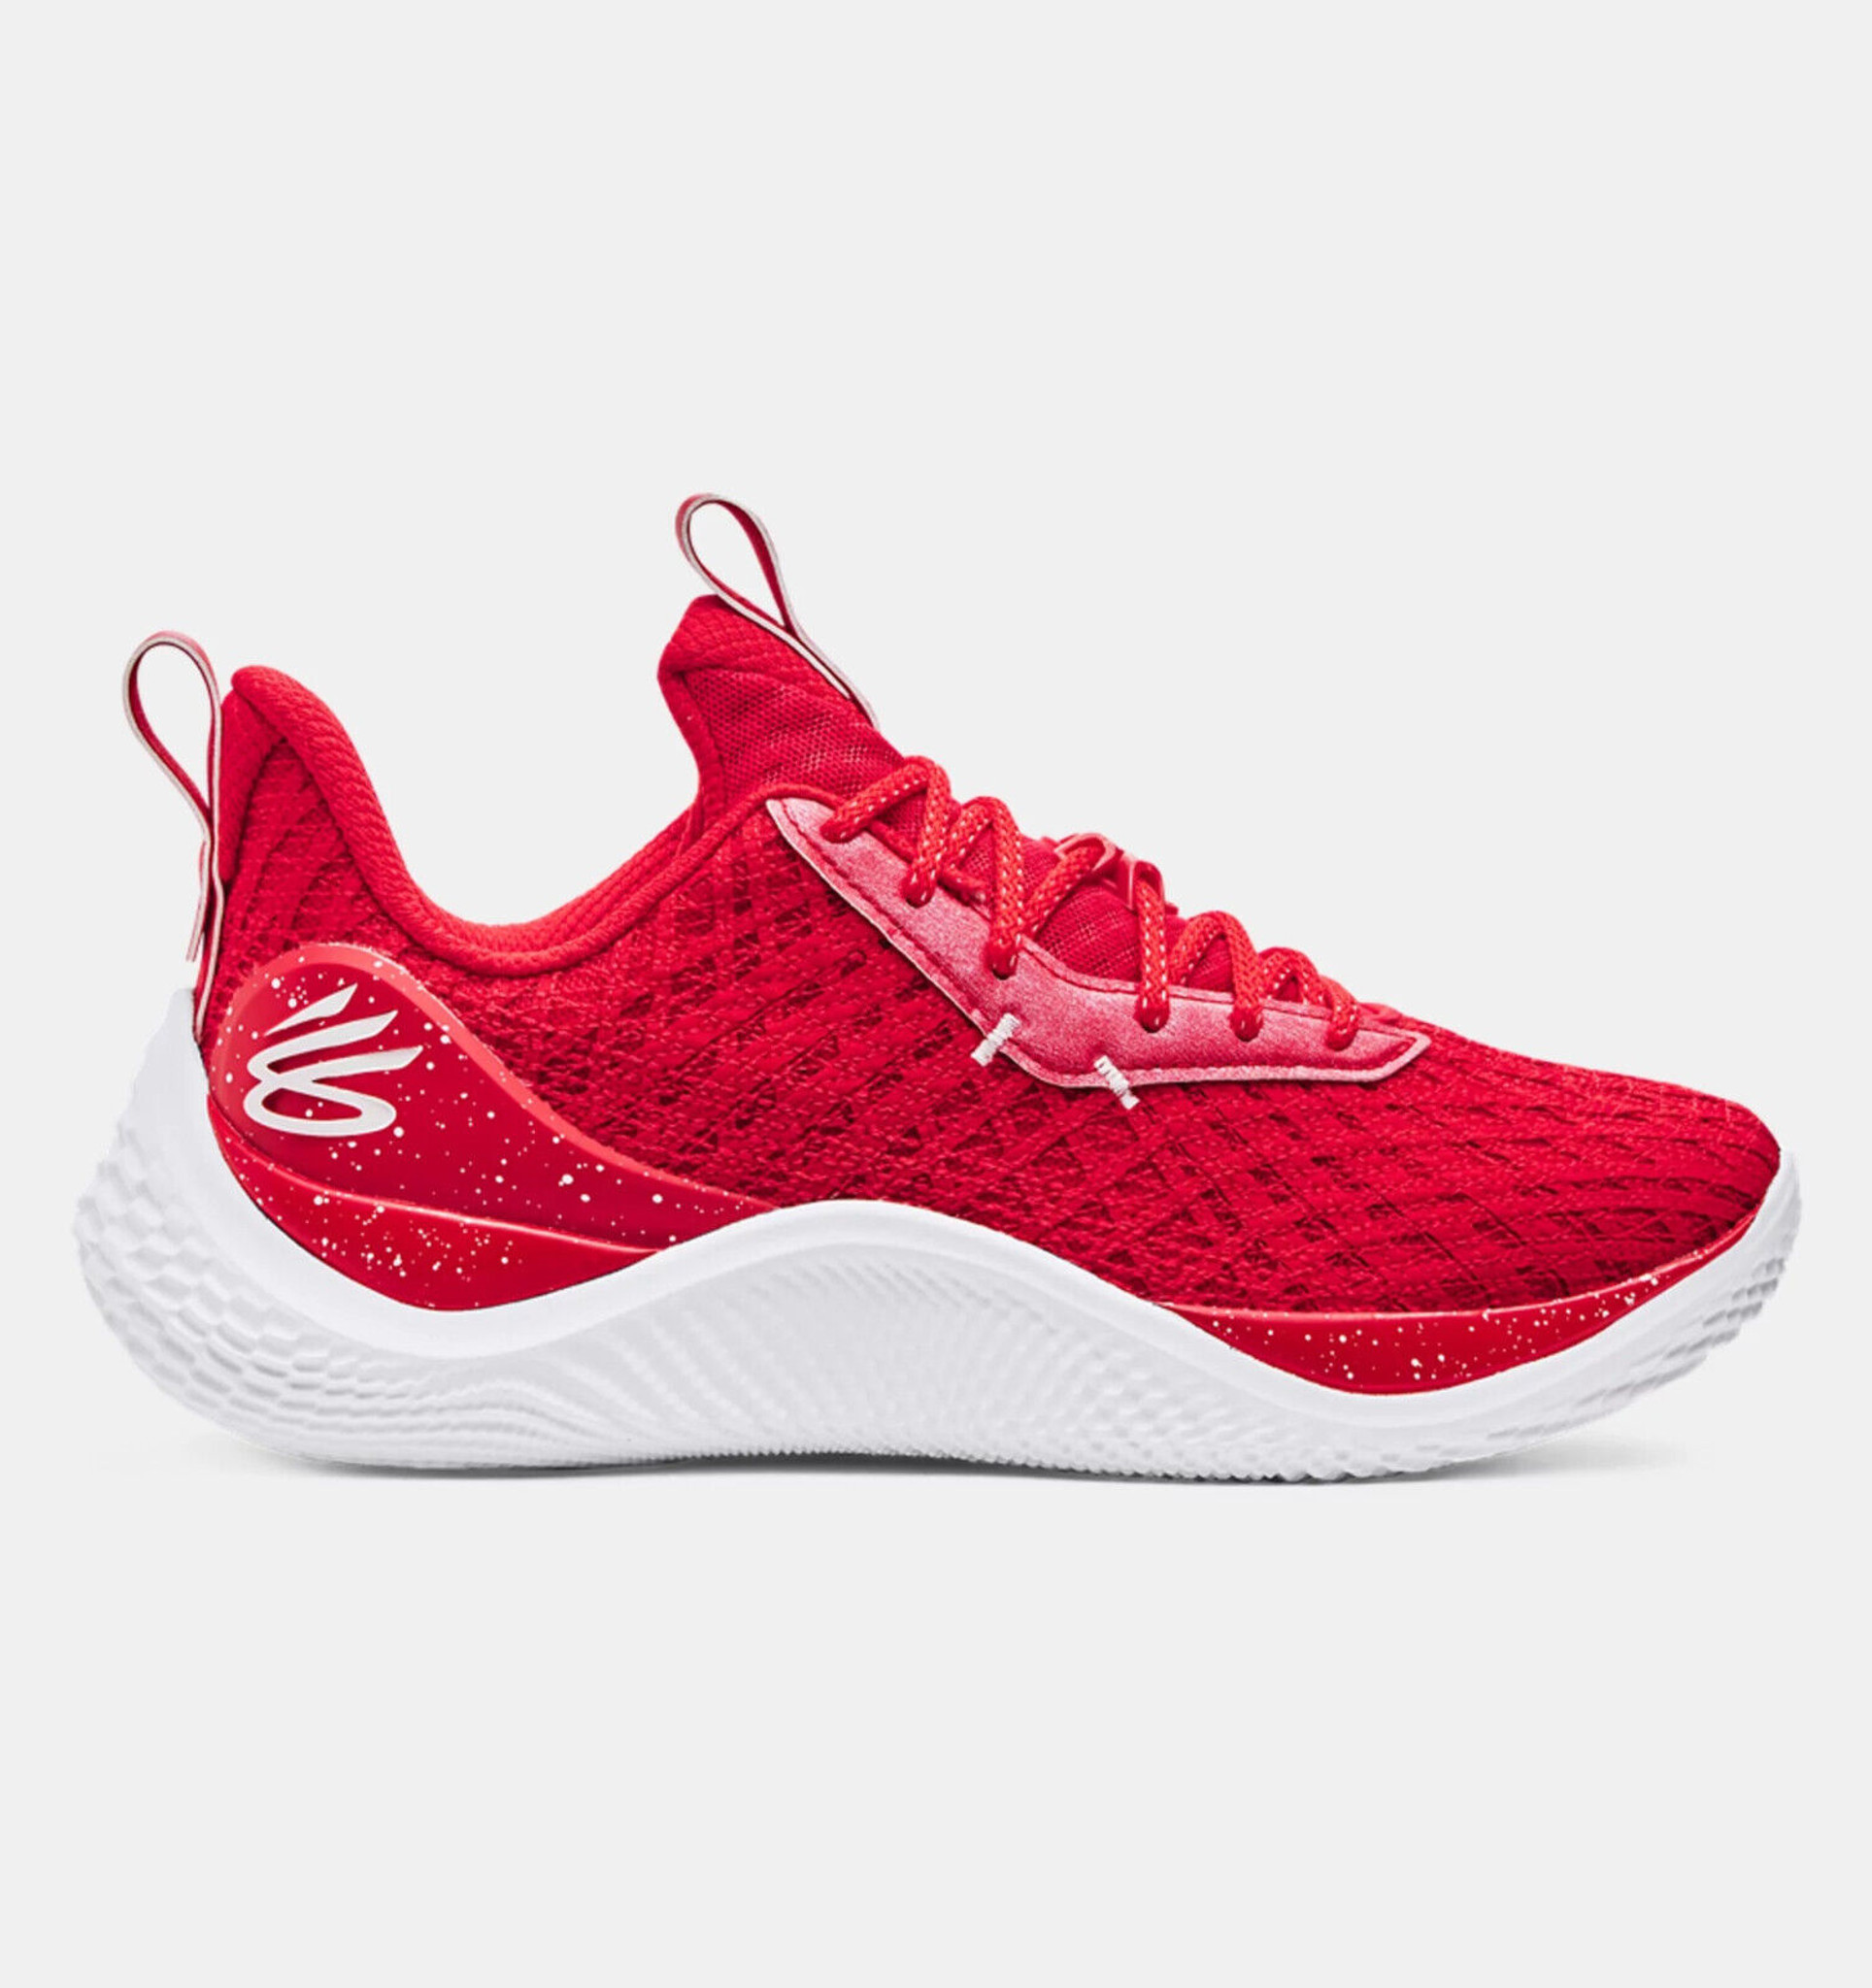 Under Armour Team Curry 10 Basketball Shoe- Red/White- 3026624